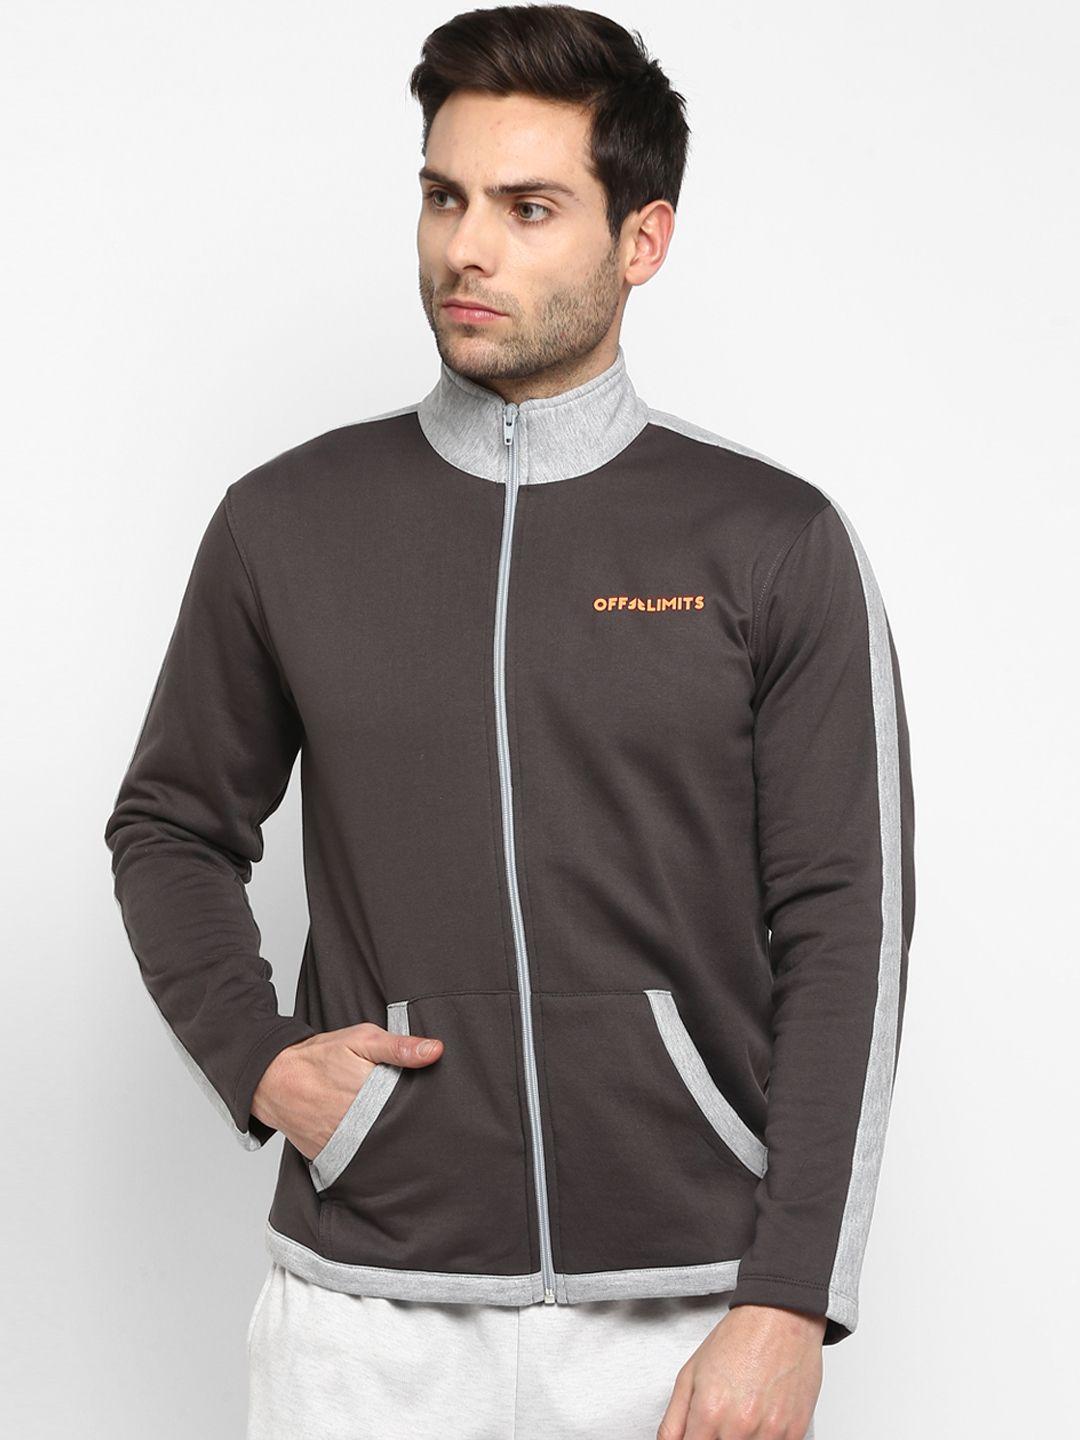 off limits men taupe & grey colourblocked sporty jacket